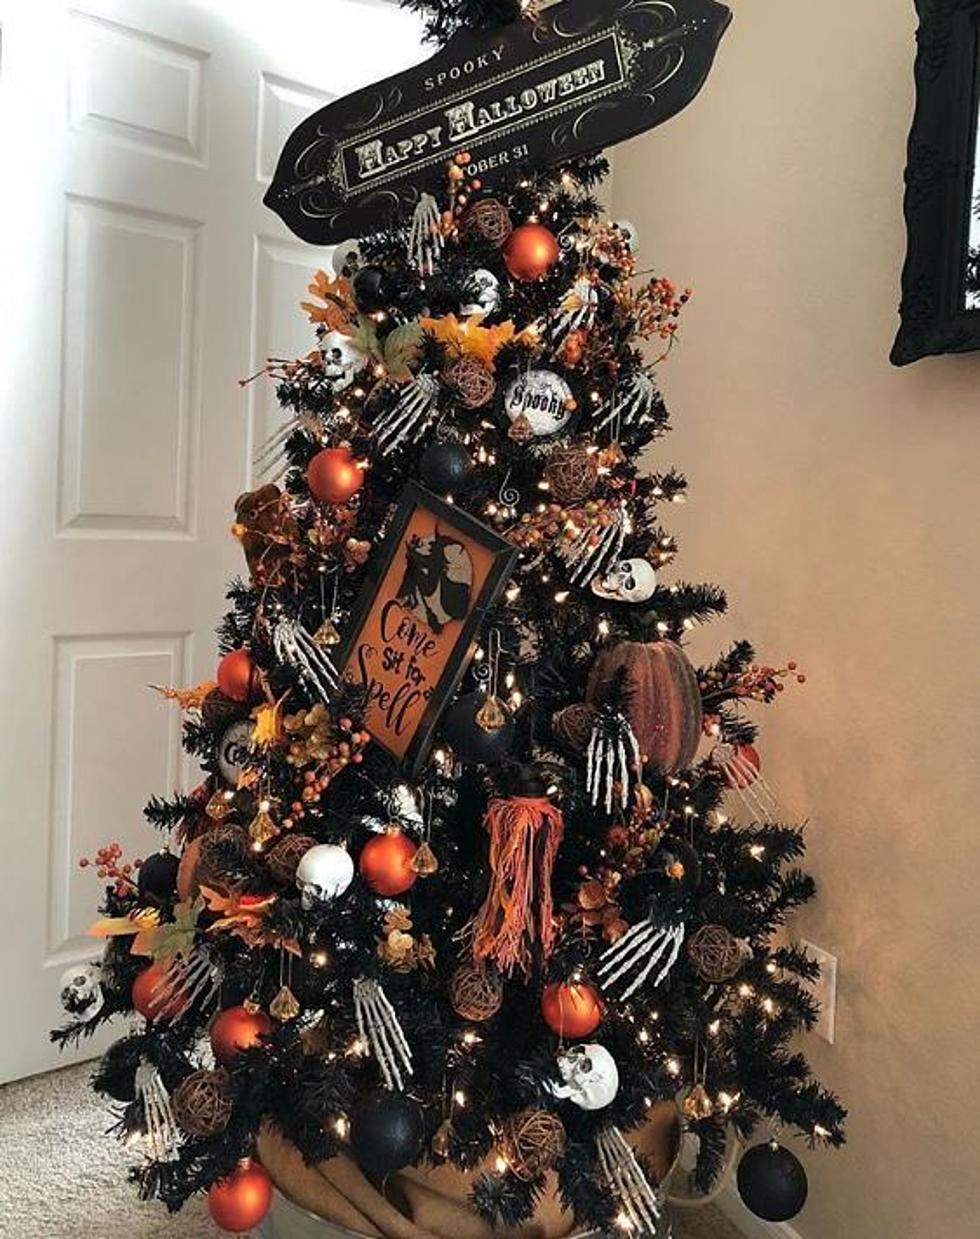 Only In 2020 - A Halloween/Thanksgiving/Christmas Tree?!?